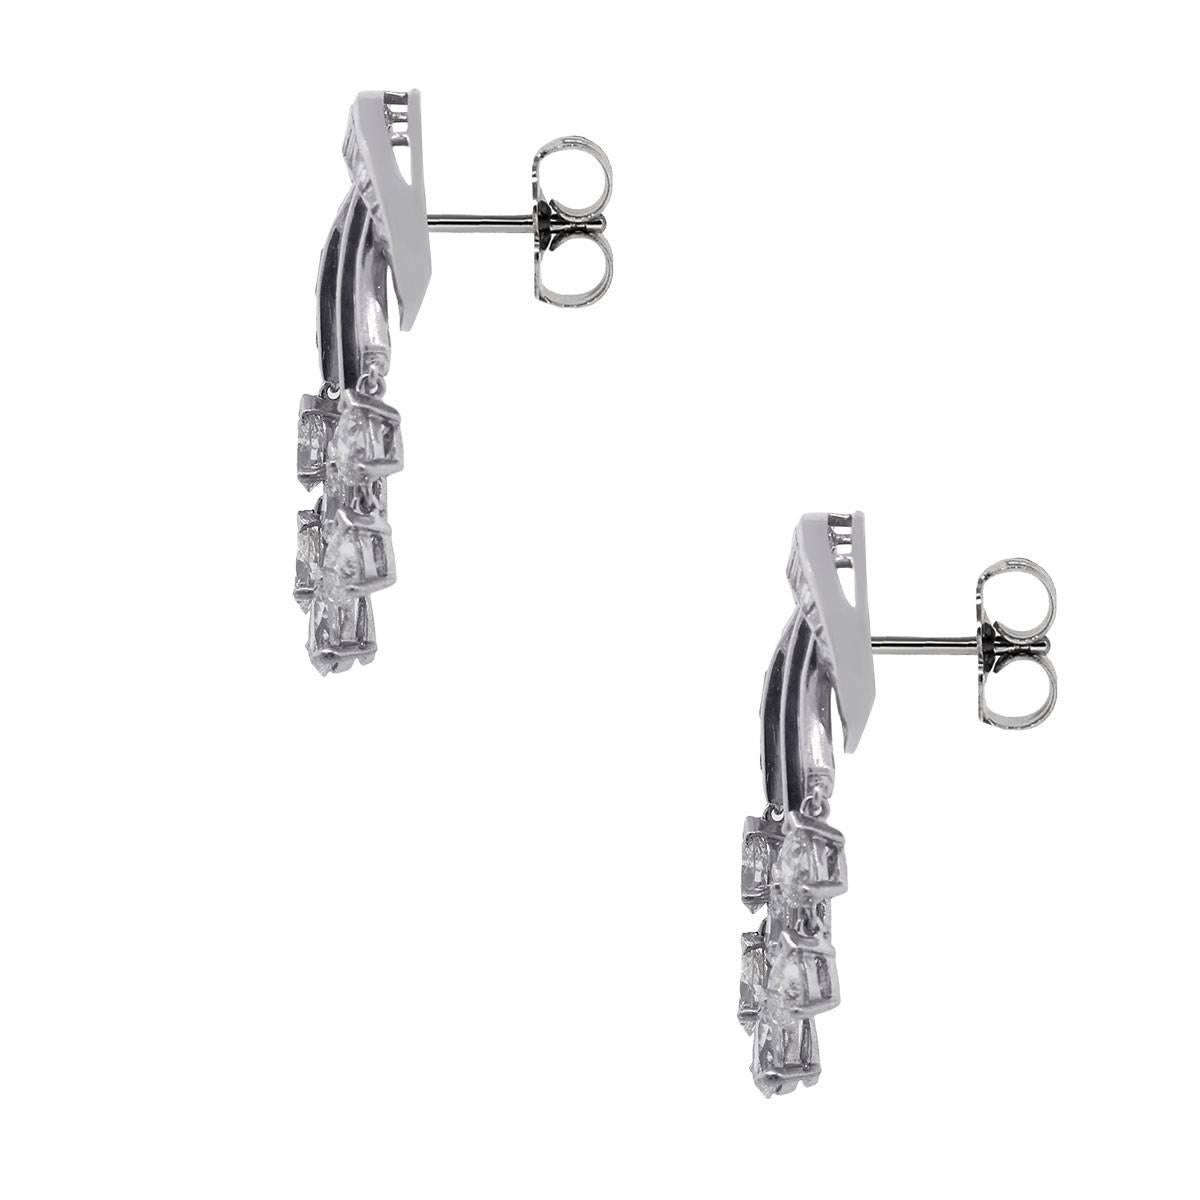 Material: Platinum
Diamond Details: Approximately 5.50ctw of baguette and pear shape diamonds. Diamonds are G/H in color and VS in clarity.
Measurements: 0.57" x 0.54" x 1.20"
Earring Backs: Post friction backs
Total Weight: 14.0g